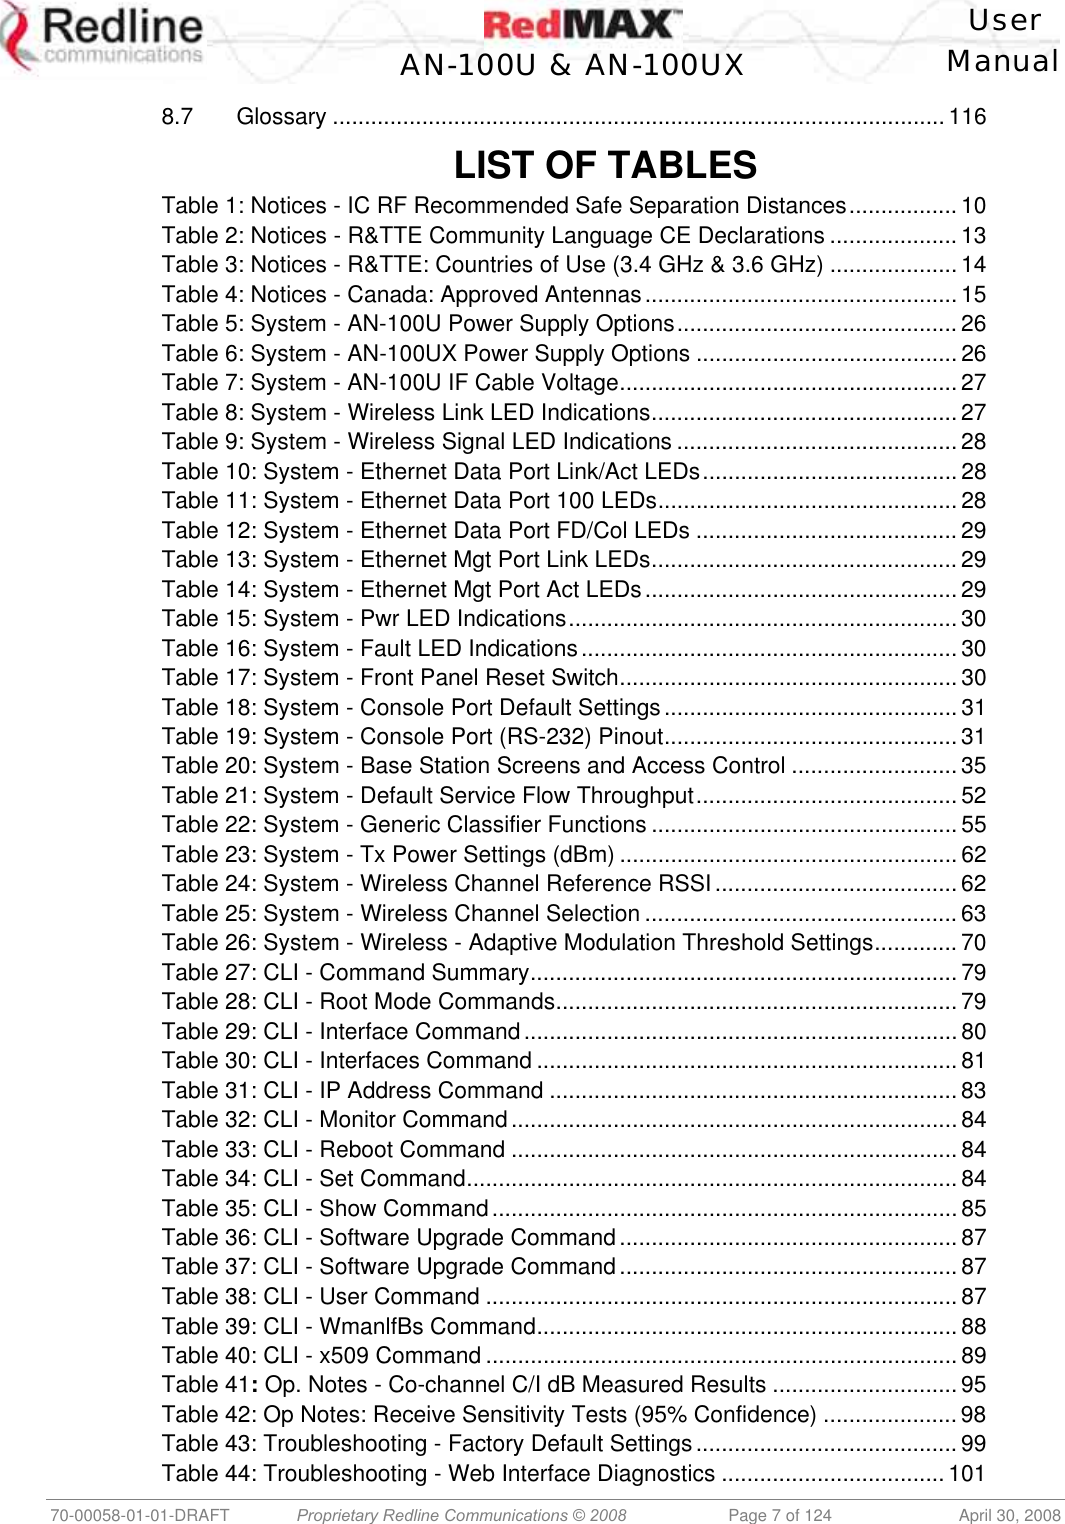    User  AN-100U &amp; AN-100UX Manual   70-00058-01-01-DRAFT  Proprietary Redline Communications © 2008   Page 7 of 124  April 30, 2008 8.7 Glossary ................................................................................................ 116  LIST OF TABLES Table 1: Notices - IC RF Recommended Safe Separation Distances................. 10 Table 2: Notices - R&amp;TTE Community Language CE Declarations .................... 13 Table 3: Notices - R&amp;TTE: Countries of Use (3.4 GHz &amp; 3.6 GHz) ....................14 Table 4: Notices - Canada: Approved Antennas................................................. 15 Table 5: System - AN-100U Power Supply Options............................................ 26 Table 6: System - AN-100UX Power Supply Options .........................................26 Table 7: System - AN-100U IF Cable Voltage..................................................... 27 Table 8: System - Wireless Link LED Indications................................................ 27 Table 9: System - Wireless Signal LED Indications ............................................ 28 Table 10: System - Ethernet Data Port Link/Act LEDs........................................ 28 Table 11: System - Ethernet Data Port 100 LEDs............................................... 28 Table 12: System - Ethernet Data Port FD/Col LEDs .........................................29 Table 13: System - Ethernet Mgt Port Link LEDs................................................ 29 Table 14: System - Ethernet Mgt Port Act LEDs................................................. 29 Table 15: System - Pwr LED Indications............................................................. 30 Table 16: System - Fault LED Indications........................................................... 30 Table 17: System - Front Panel Reset Switch.....................................................30 Table 18: System - Console Port Default Settings.............................................. 31 Table 19: System - Console Port (RS-232) Pinout.............................................. 31 Table 20: System - Base Station Screens and Access Control .......................... 35 Table 21: System - Default Service Flow Throughput......................................... 52 Table 22: System - Generic Classifier Functions ................................................ 55 Table 23: System - Tx Power Settings (dBm) ..................................................... 62 Table 24: System - Wireless Channel Reference RSSI...................................... 62 Table 25: System - Wireless Channel Selection ................................................. 63 Table 26: System - Wireless - Adaptive Modulation Threshold Settings............. 70 Table 27: CLI - Command Summary...................................................................79 Table 28: CLI - Root Mode Commands............................................................... 79 Table 29: CLI - Interface Command.................................................................... 80 Table 30: CLI - Interfaces Command .................................................................. 81 Table 31: CLI - IP Address Command ................................................................ 83 Table 32: CLI - Monitor Command...................................................................... 84 Table 33: CLI - Reboot Command ...................................................................... 84 Table 34: CLI - Set Command.............................................................................84 Table 35: CLI - Show Command......................................................................... 85 Table 36: CLI - Software Upgrade Command..................................................... 87 Table 37: CLI - Software Upgrade Command..................................................... 87 Table 38: CLI - User Command .......................................................................... 87 Table 39: CLI - WmanlfBs Command..................................................................88 Table 40: CLI - x509 Command .......................................................................... 89 Table 41: Op. Notes - Co-channel C/I dB Measured Results ............................. 95 Table 42: Op Notes: Receive Sensitivity Tests (95% Confidence) ..................... 98 Table 43: Troubleshooting - Factory Default Settings......................................... 99 Table 44: Troubleshooting - Web Interface Diagnostics ................................... 101 